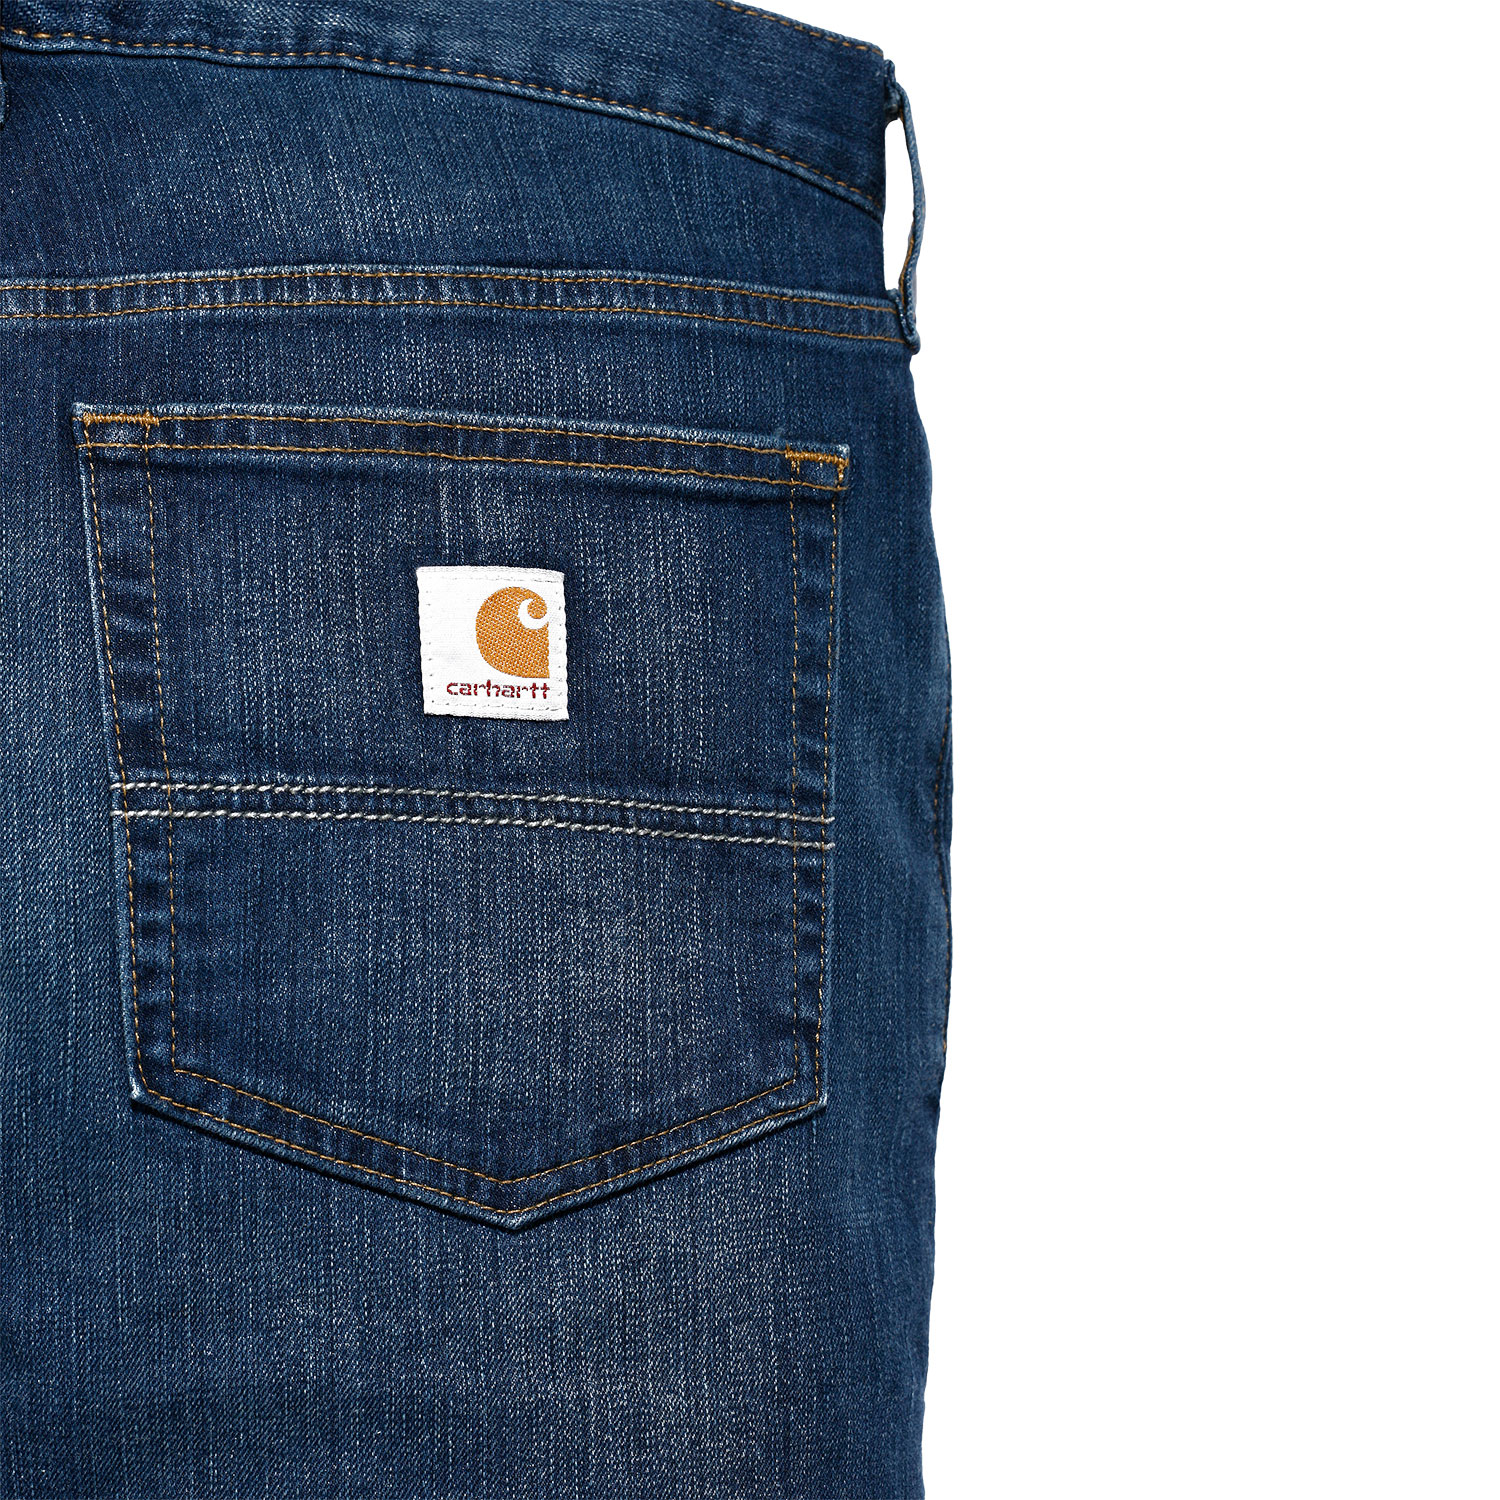 Carhartt Jeans Rugged Flex Relaxed Fit